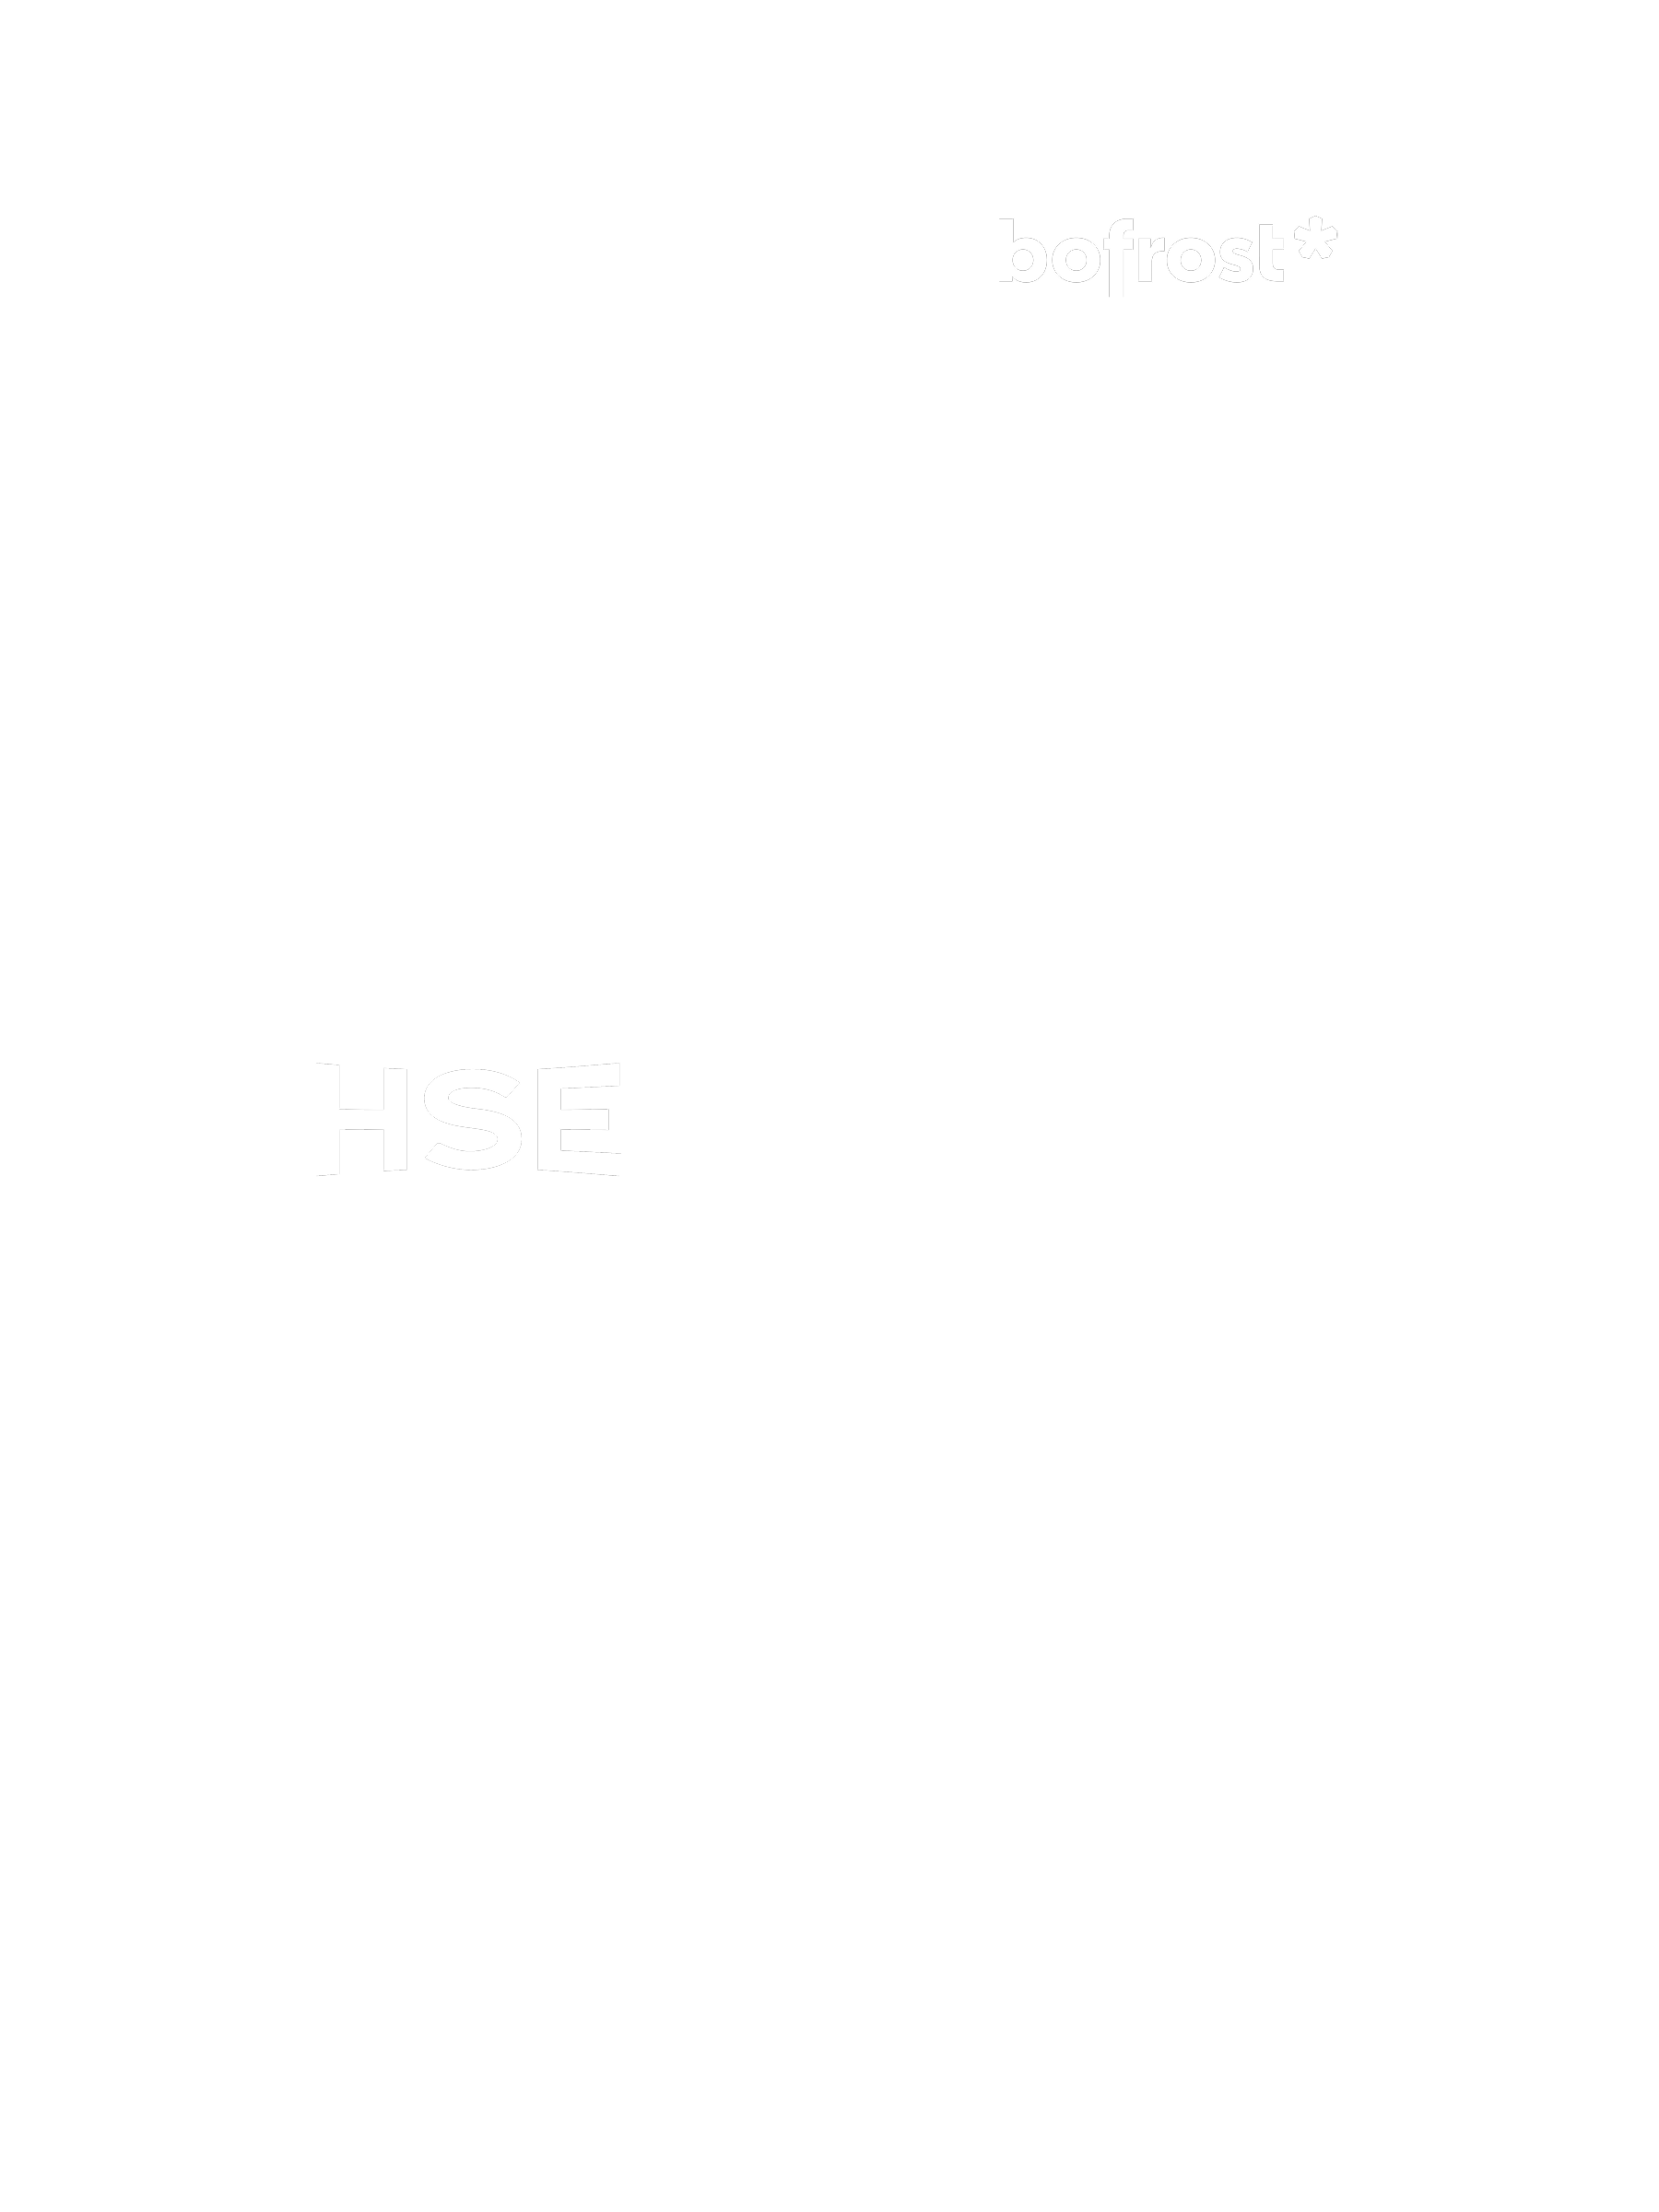 Picture of a bunch of different logos, from companies Jung von Matt BRAND IDENTITY has worked with, placed on a black background.